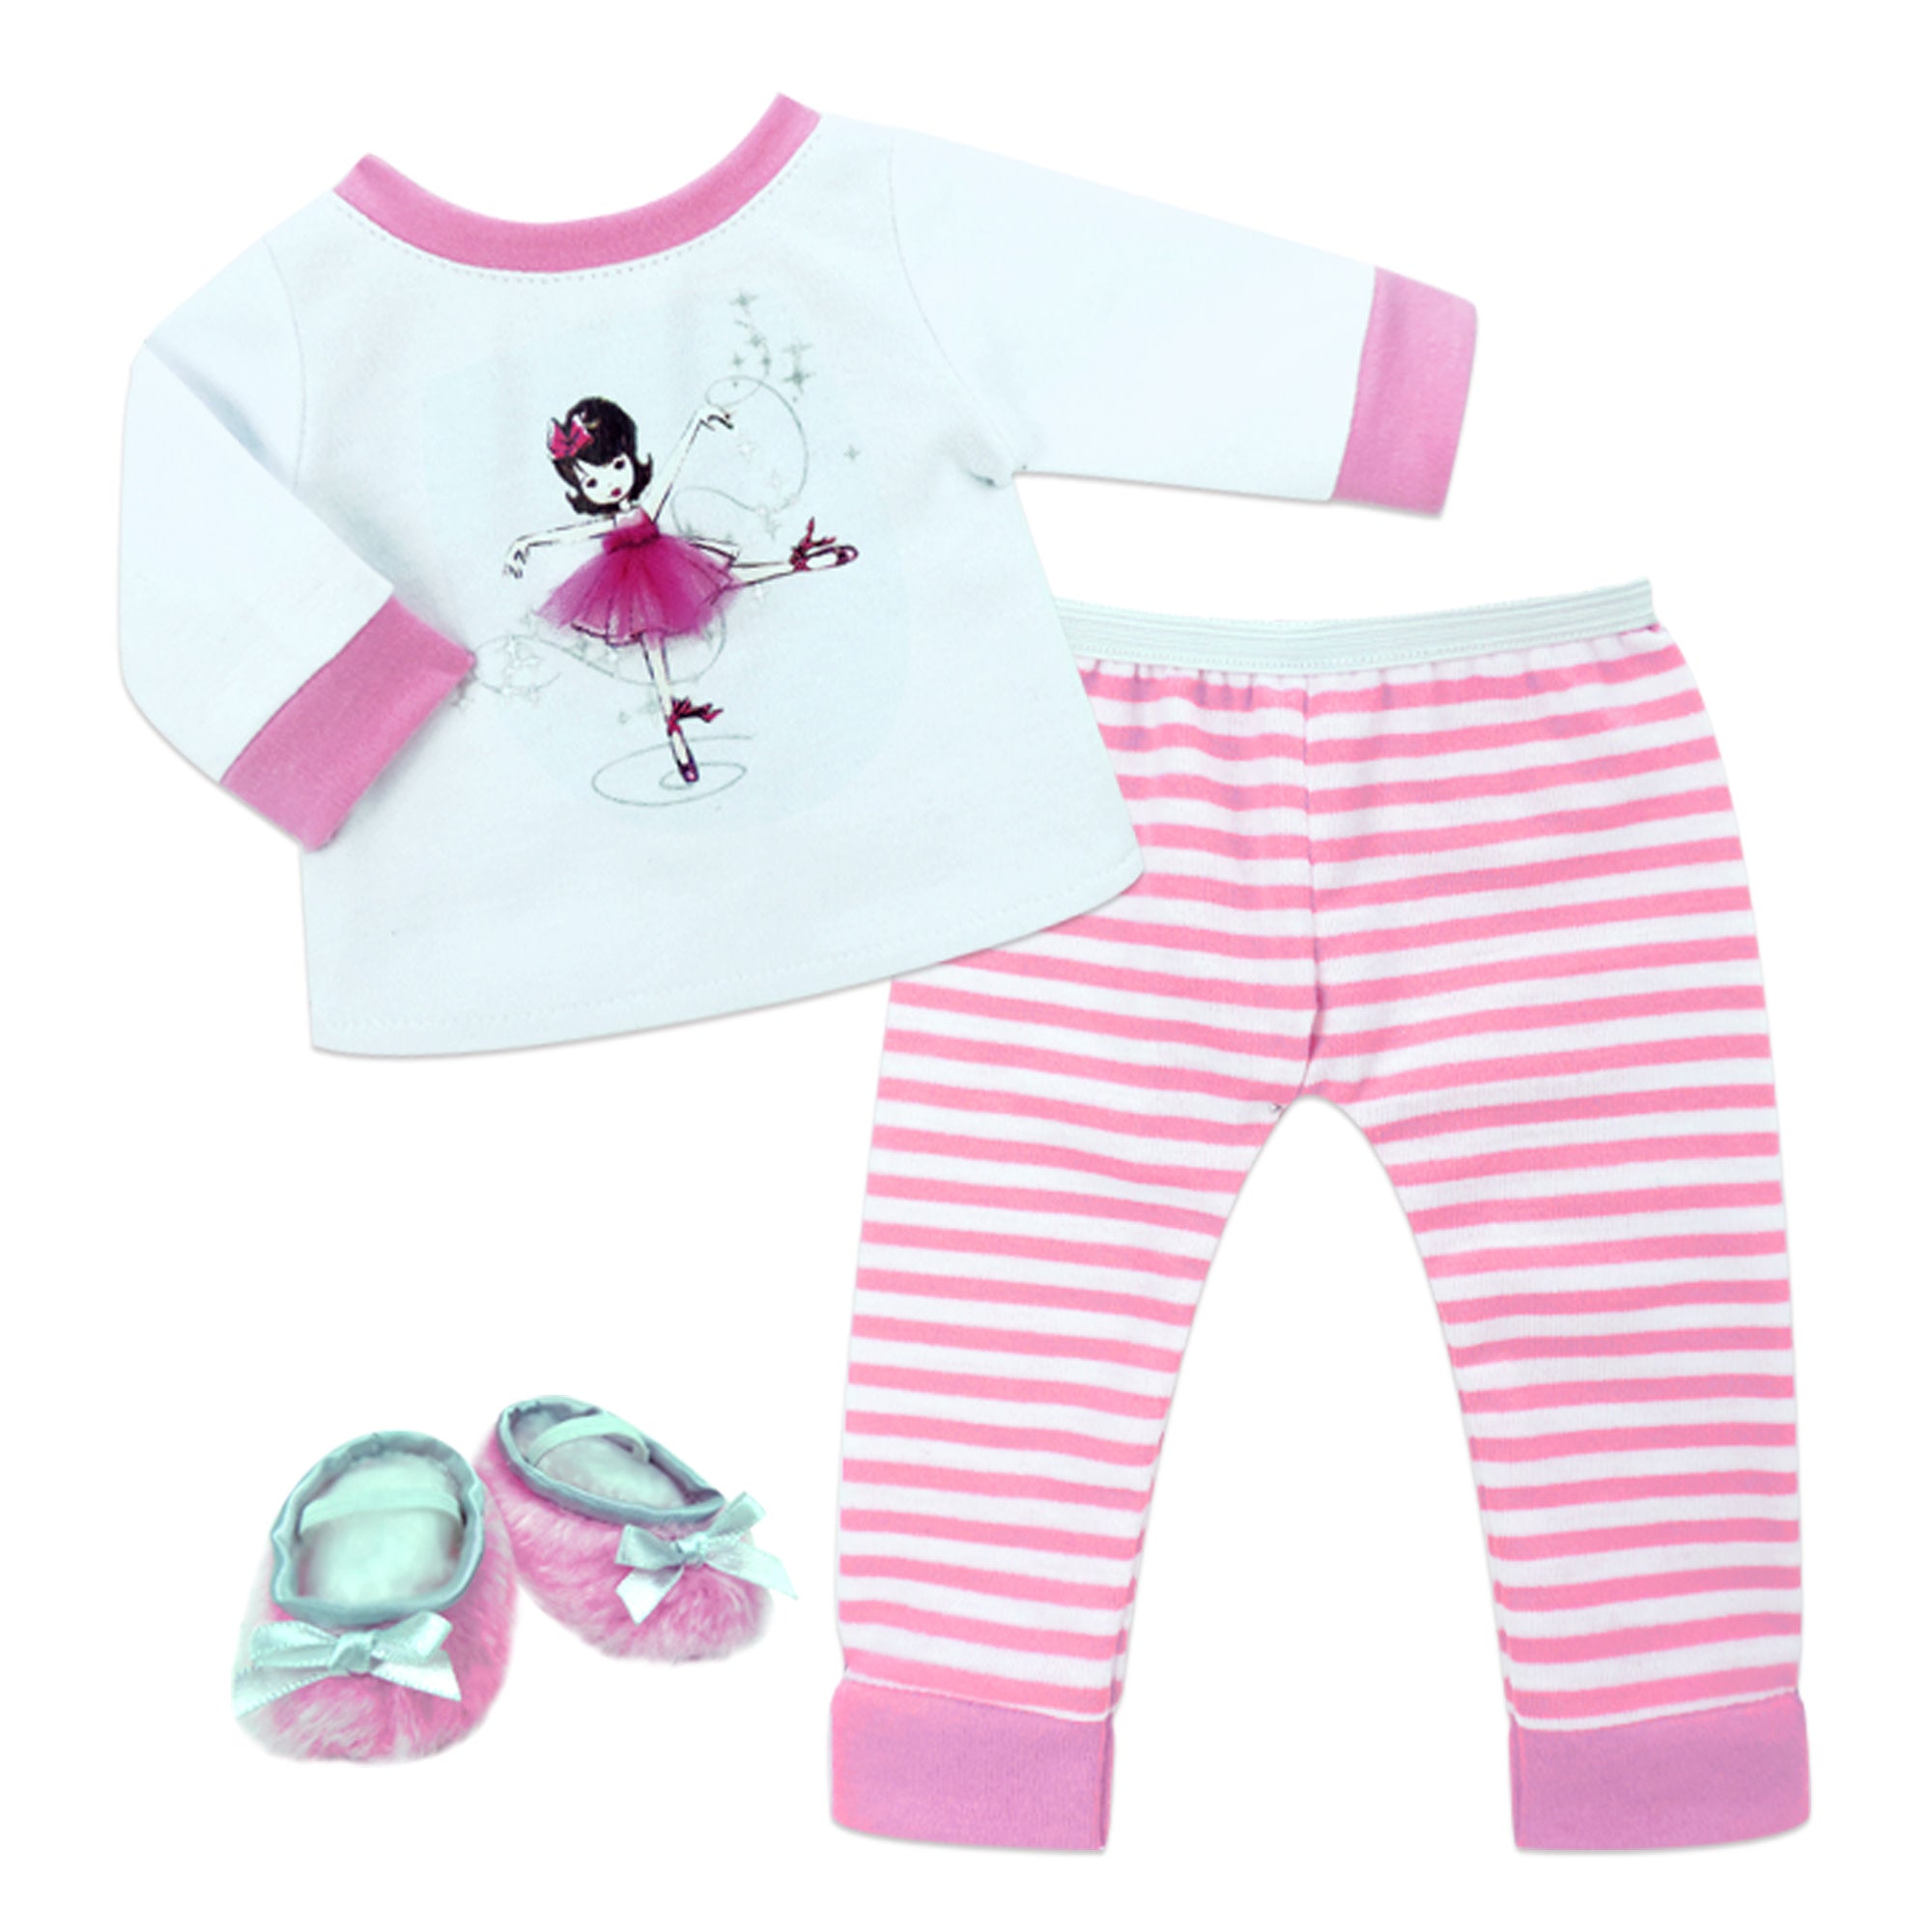 Sophia’s Long-Sleeved Ballerina Design Sleep Tee, Striped Pajama Pants, &  Fuzzy Faux Fur Slippers with Silver Bows Complete Outfit Set for 15” Baby